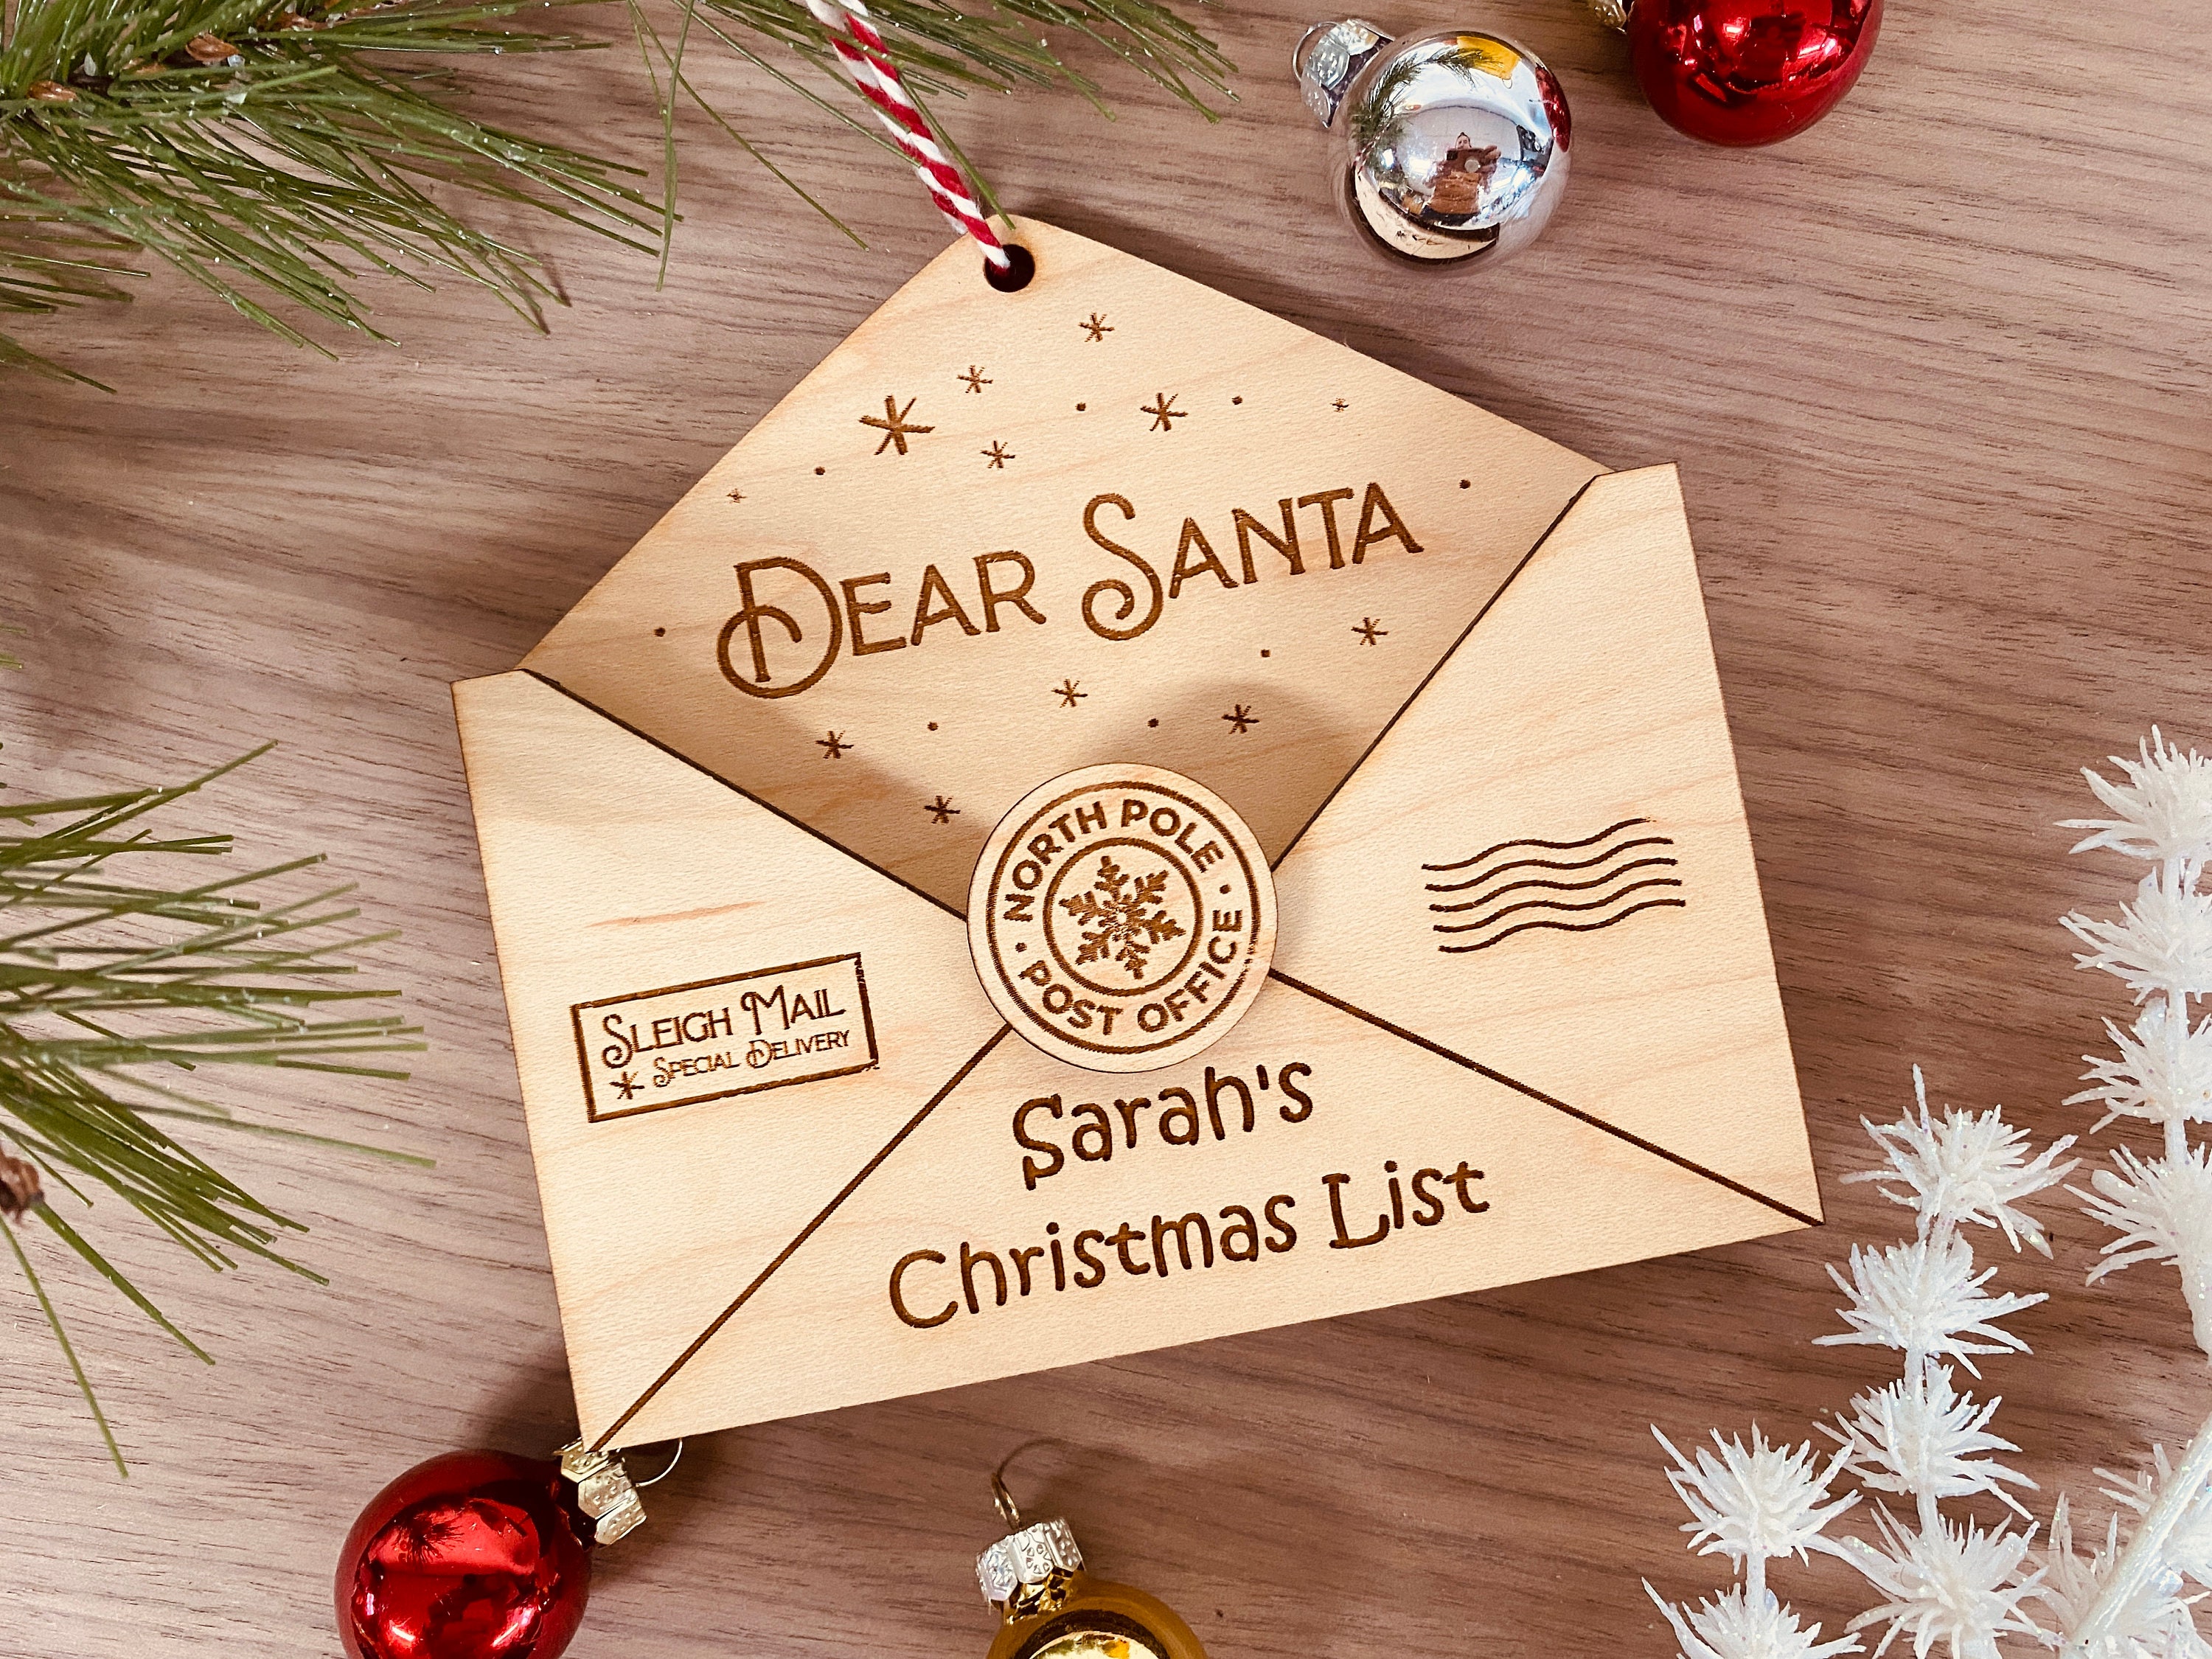 Dear Santa Wish List Ornament With Pocket for a Letter - Etsy